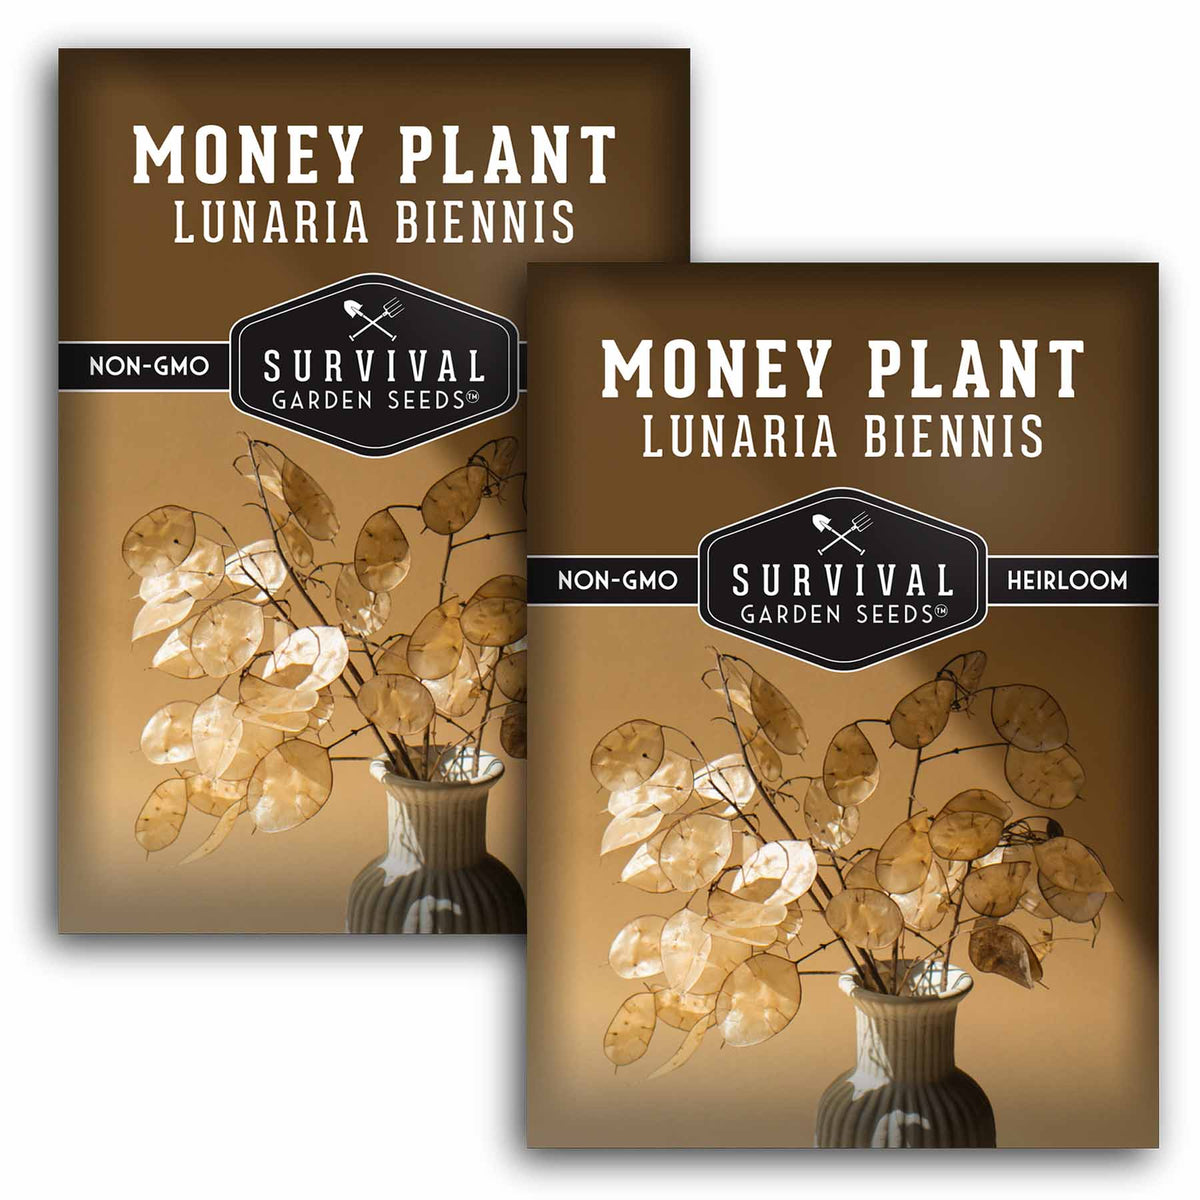 2 packets of Money Plant seeds